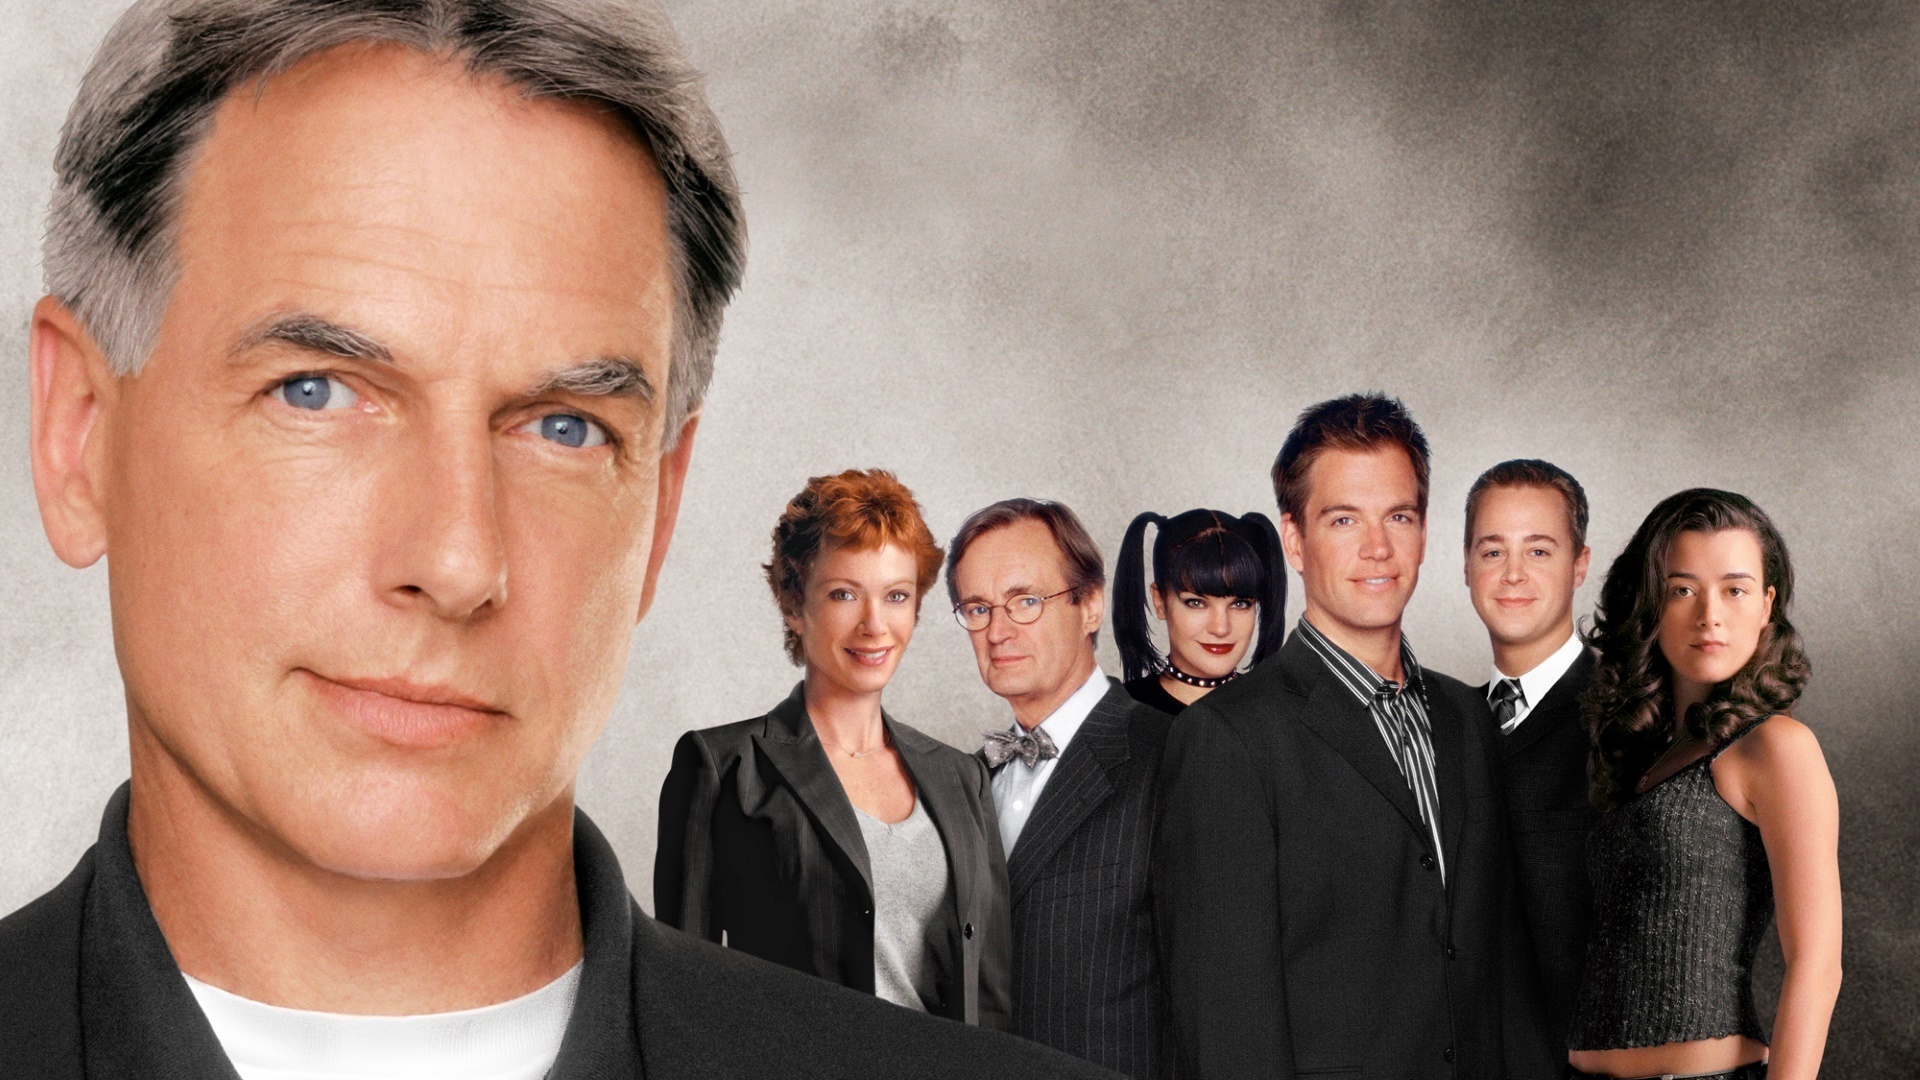 NCIS HD Wallpapers and Backgrounds. 